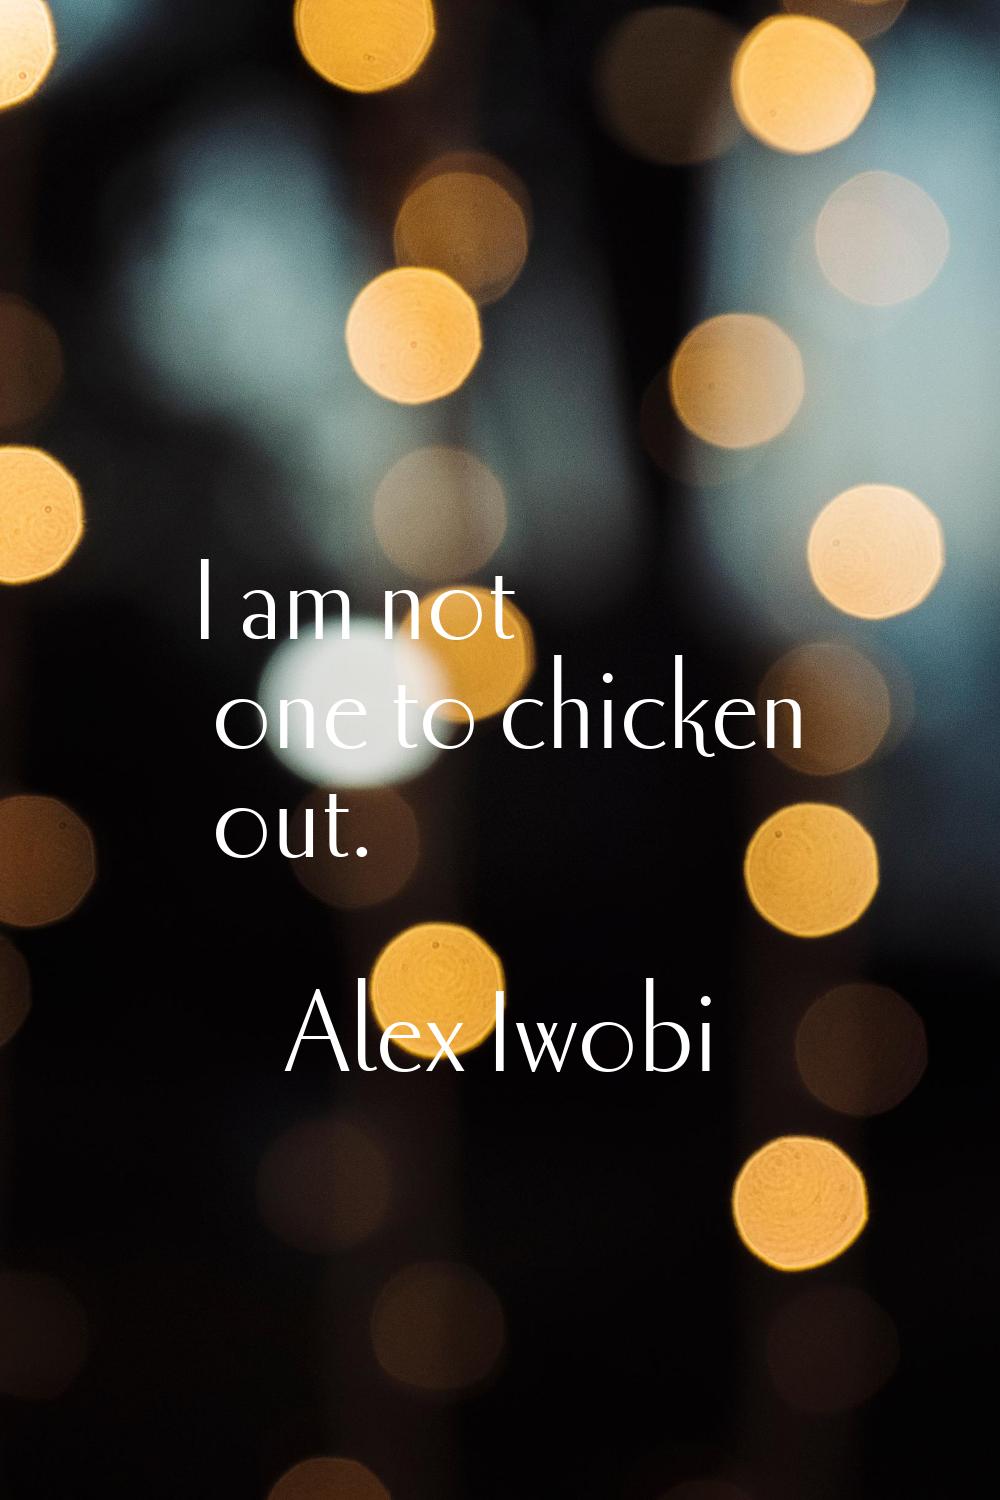 I am not one to chicken out.